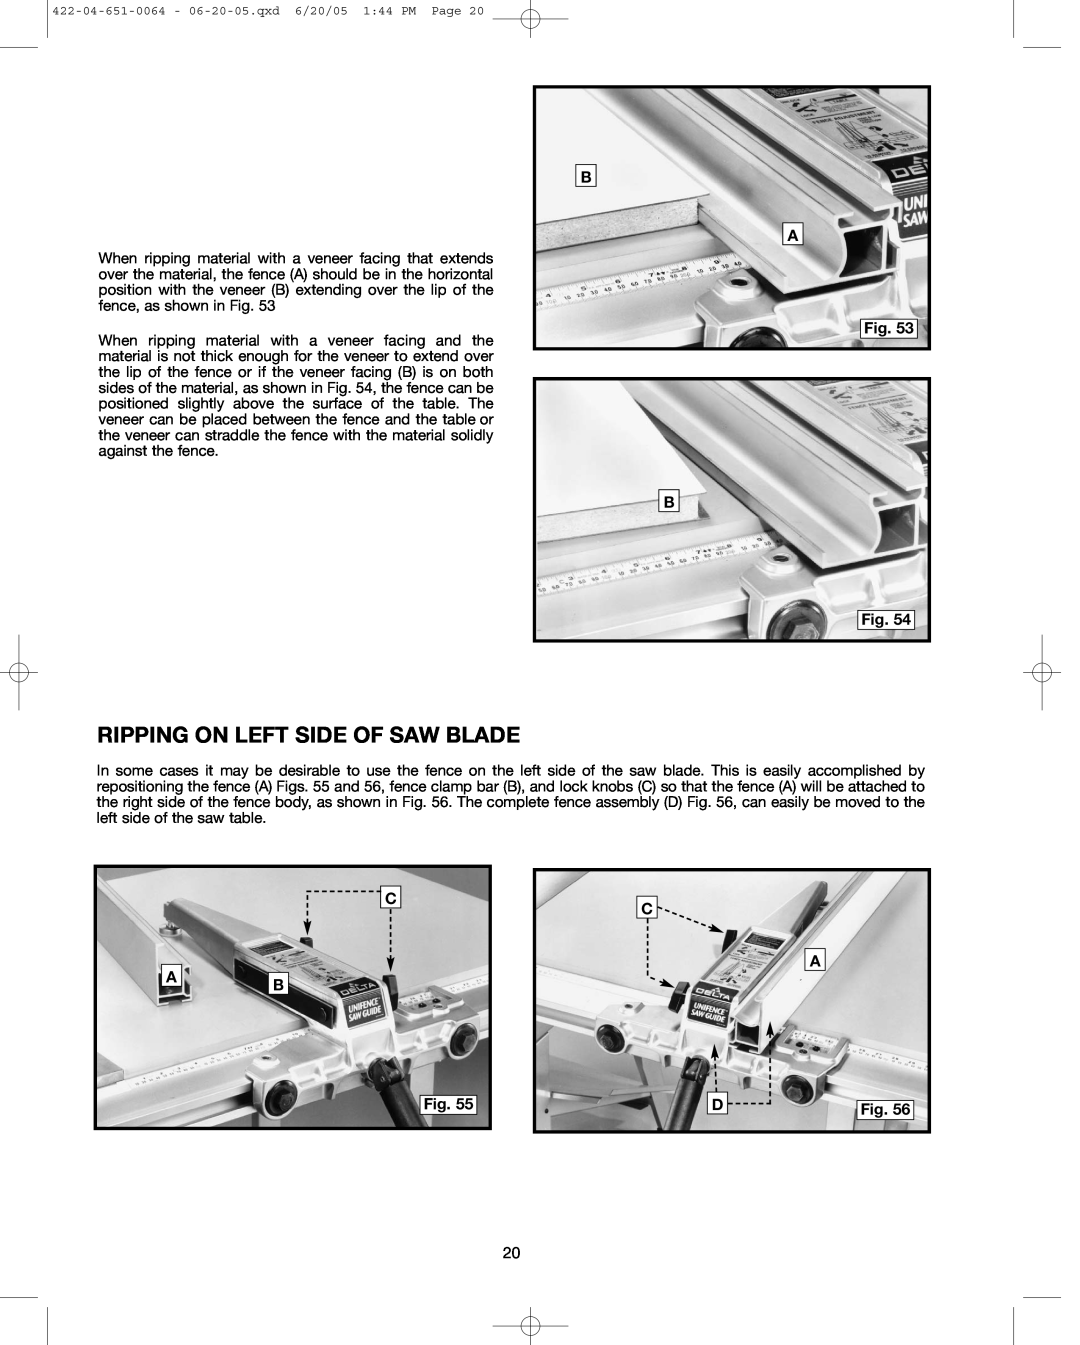 Delta 34-801, 34-814, 34-806 instruction manual Ripping On Left Side Of Saw Blade 